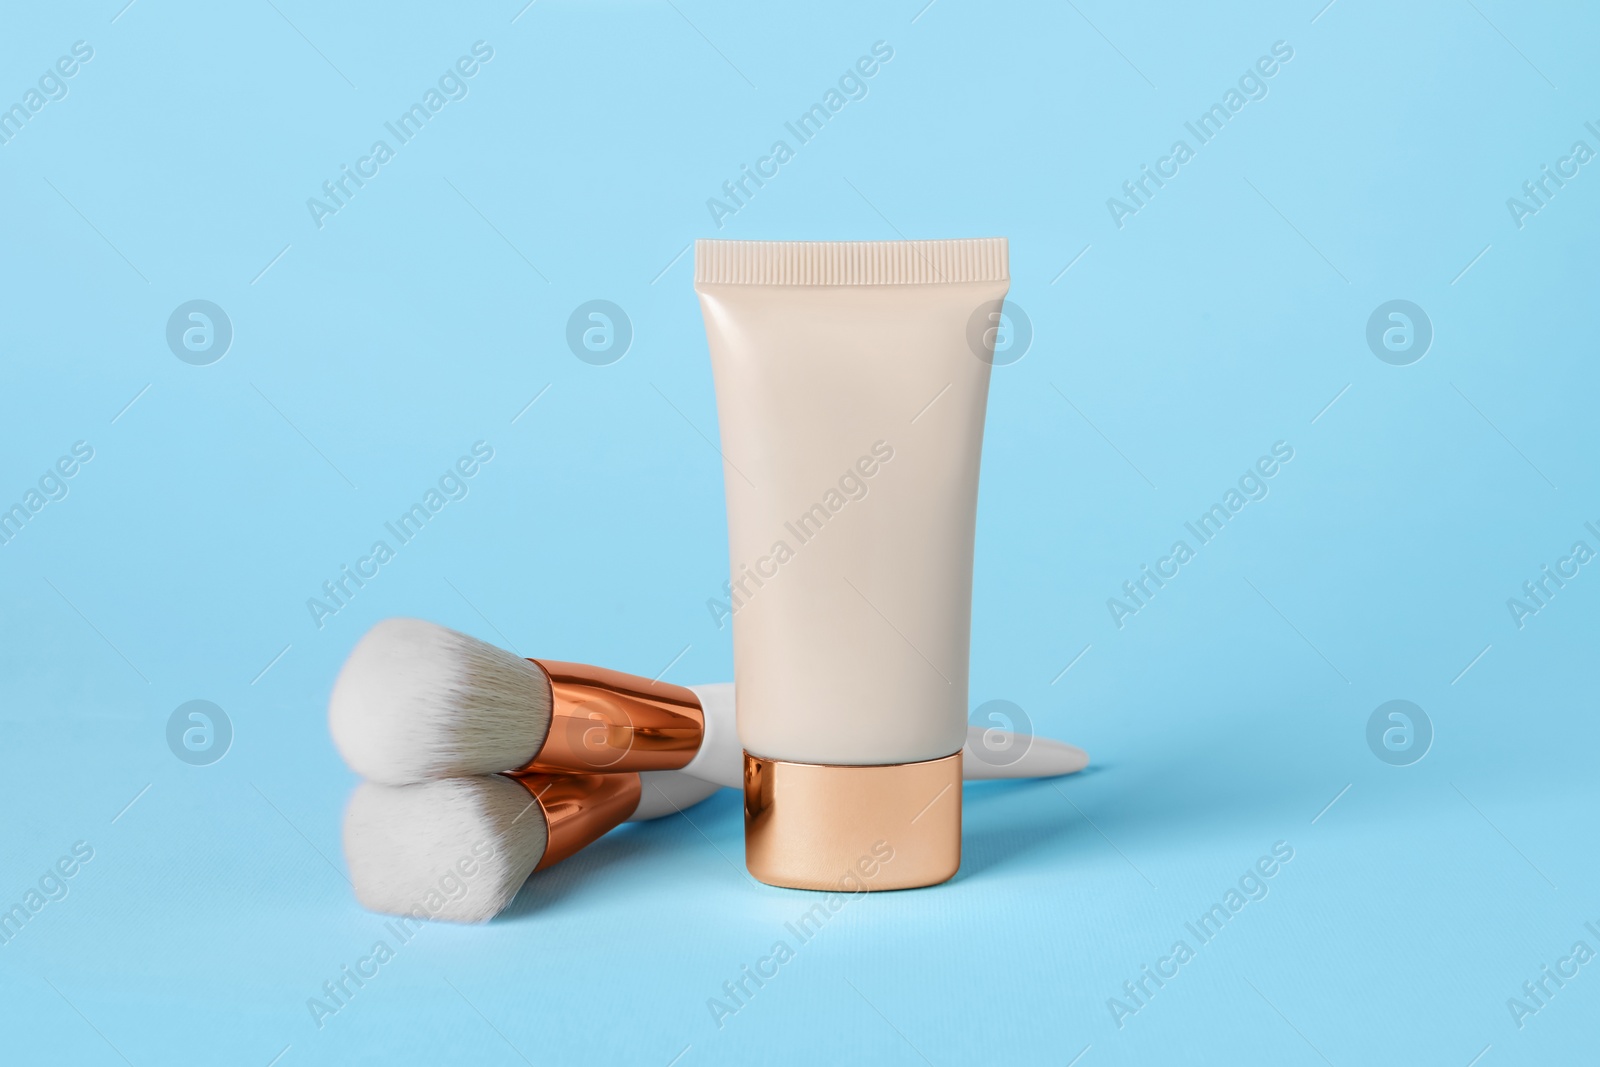 Photo of Tube of skin foundation and brushes on light blue background. Makeup product